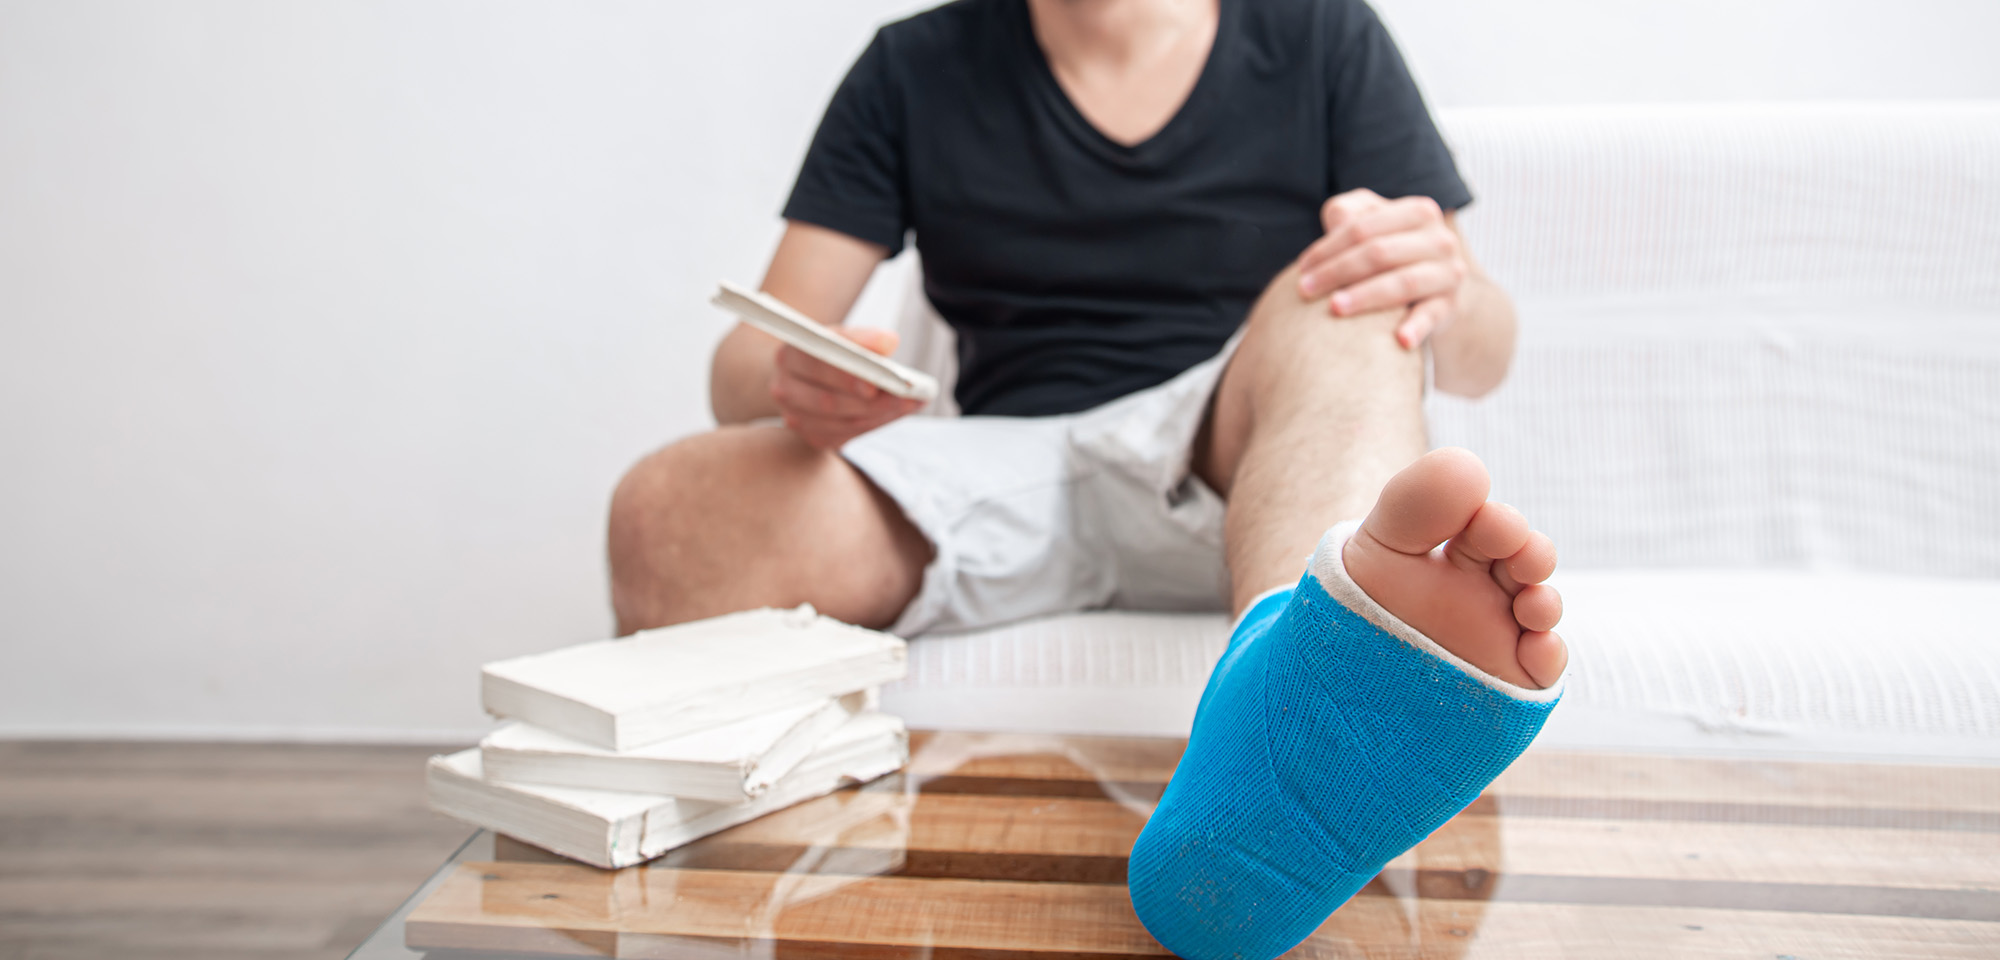 Ankle Injuries Treatment